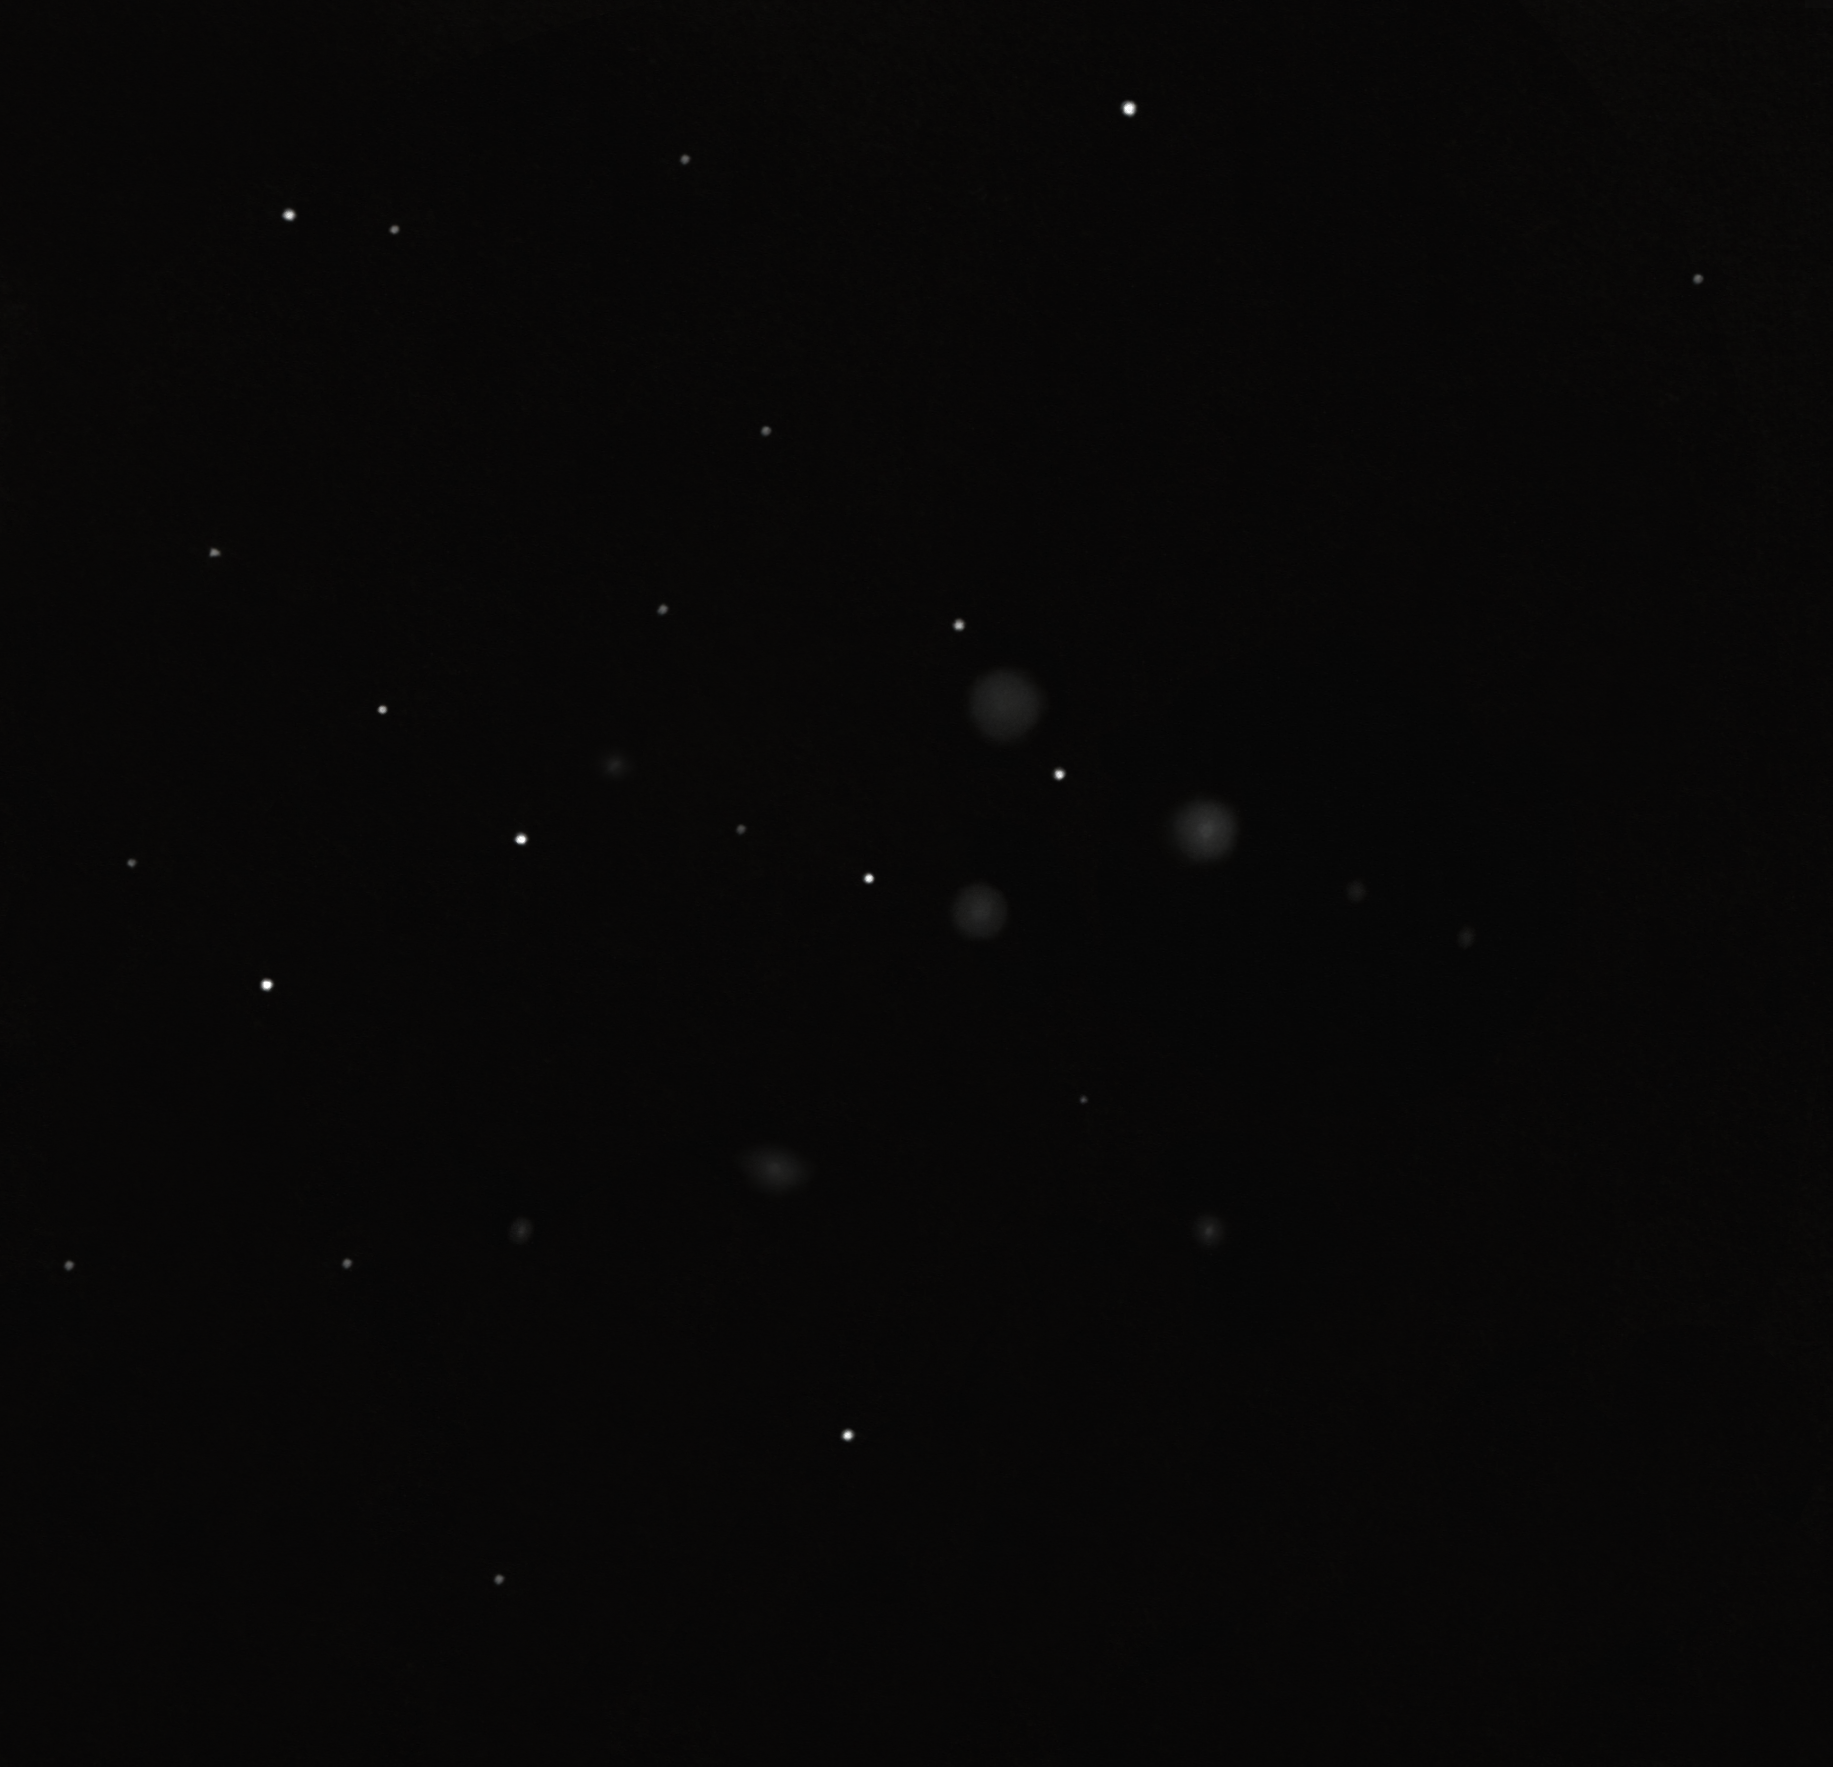 ngc0070-group-T508-md3e.png